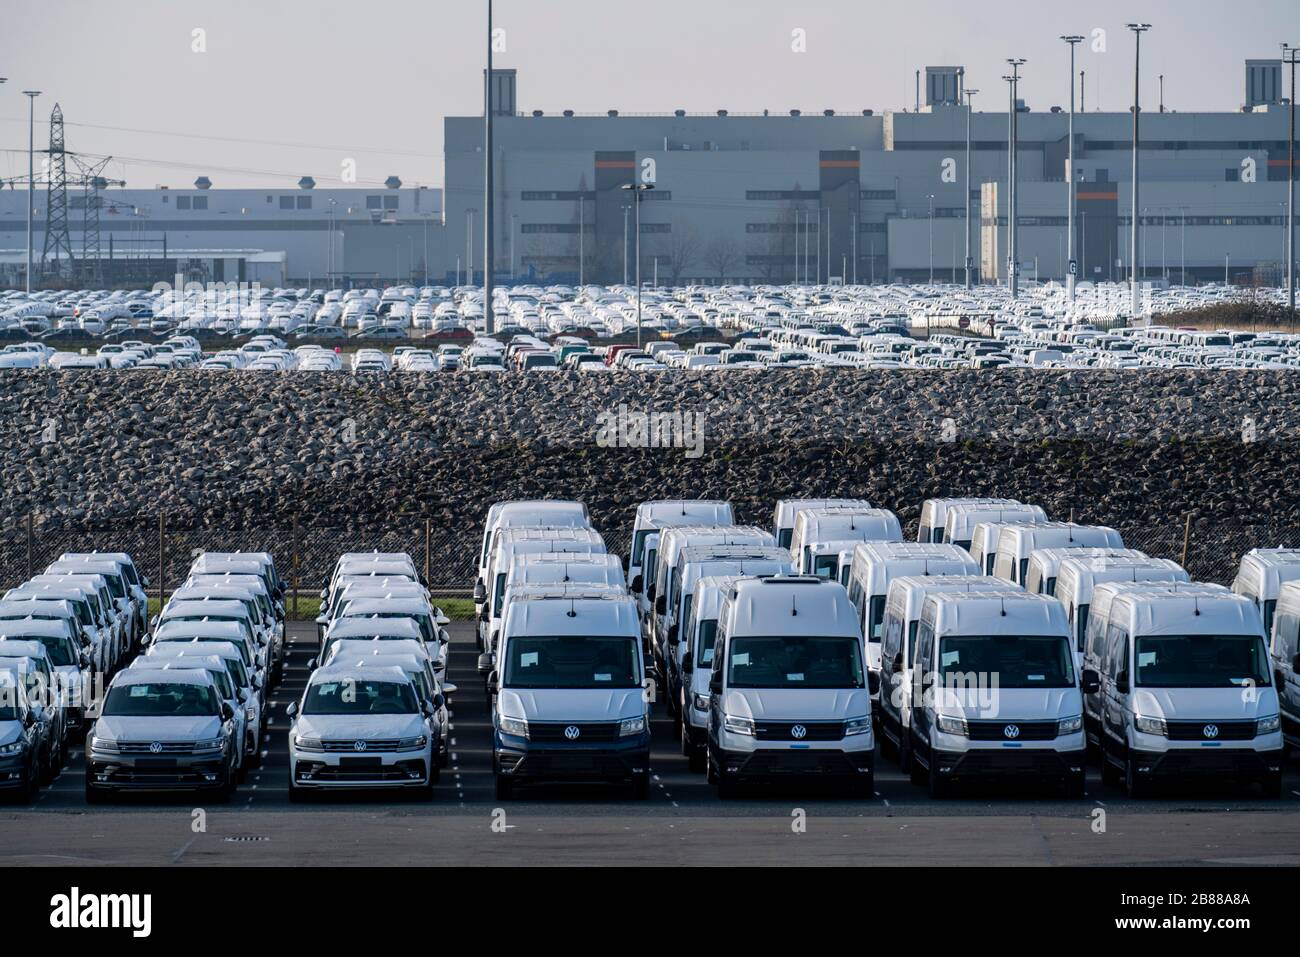 VW plant, Emden, new cars, waiting to be shipped, Lower Saxony, Germany, Stock Photo